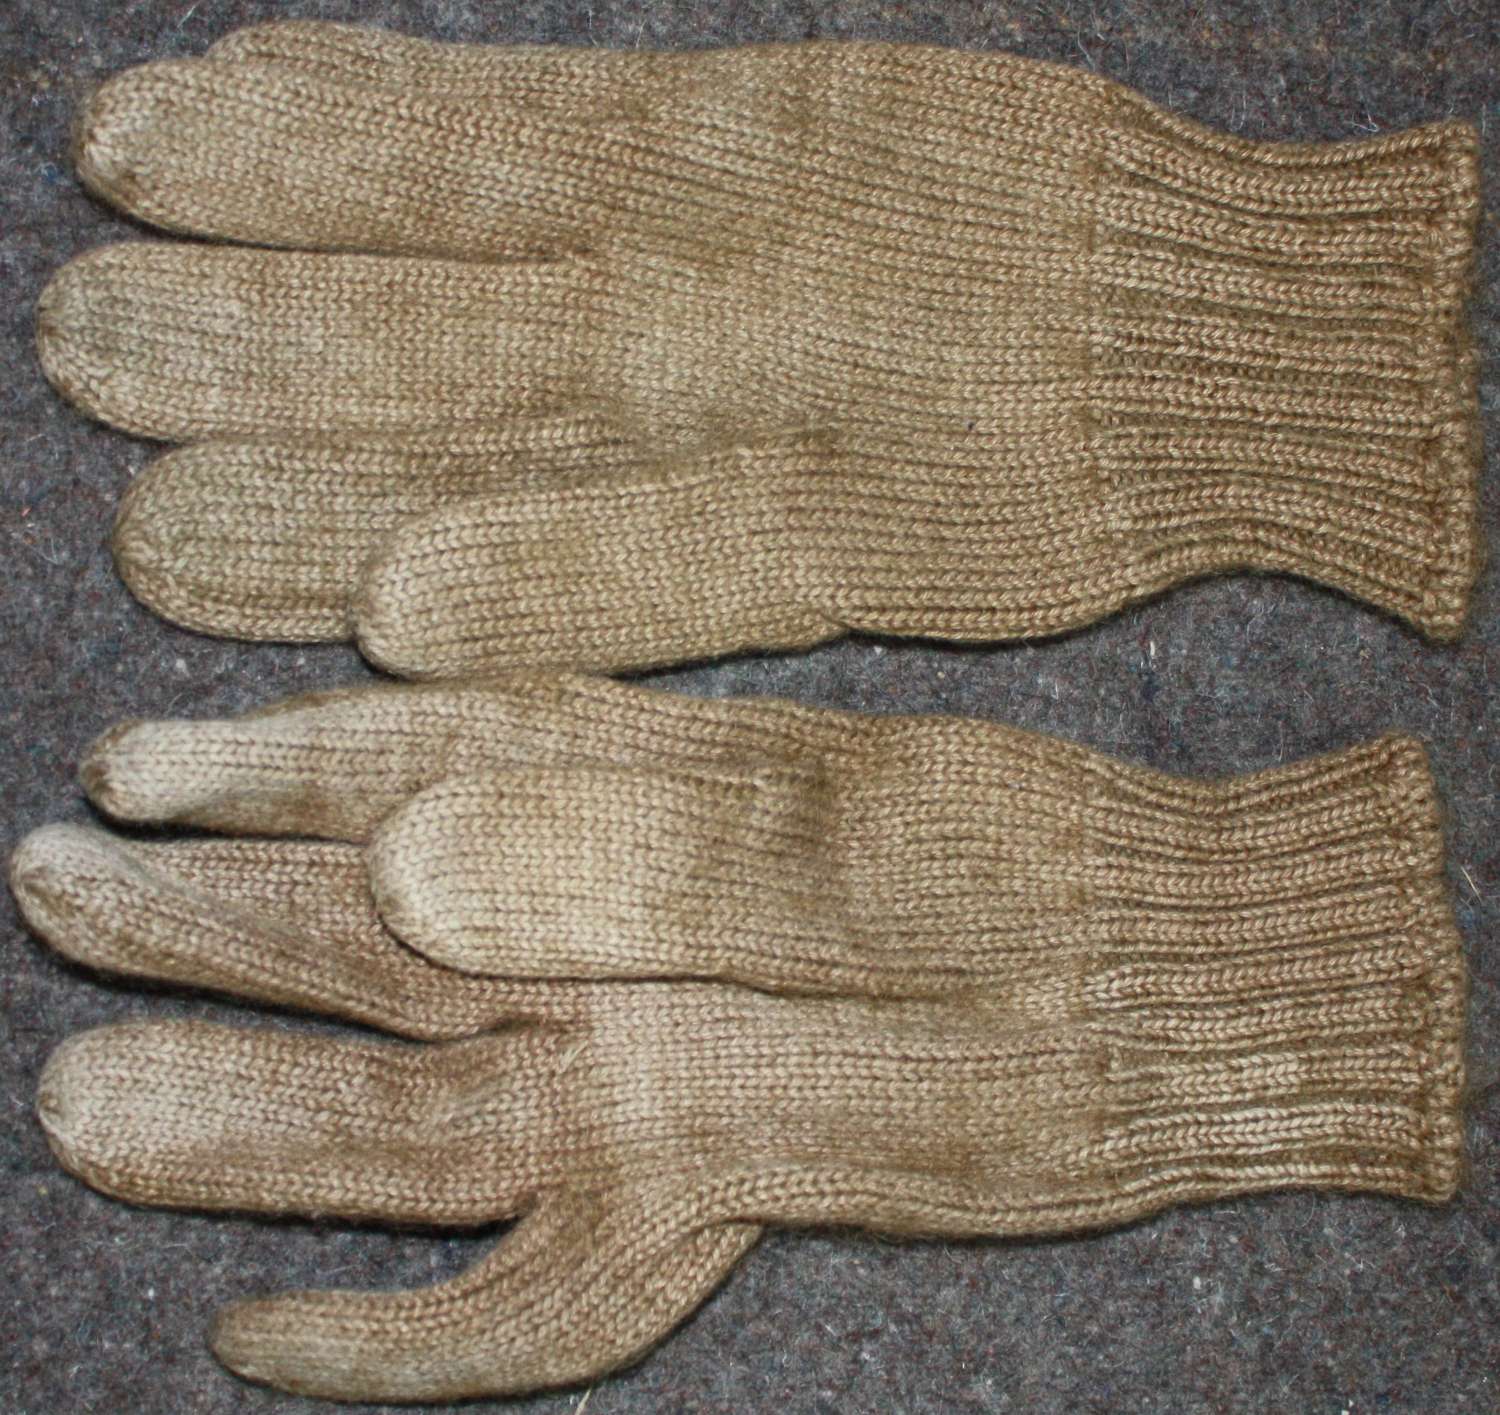 A GOOD USED WWII PAIR OF GLOVES